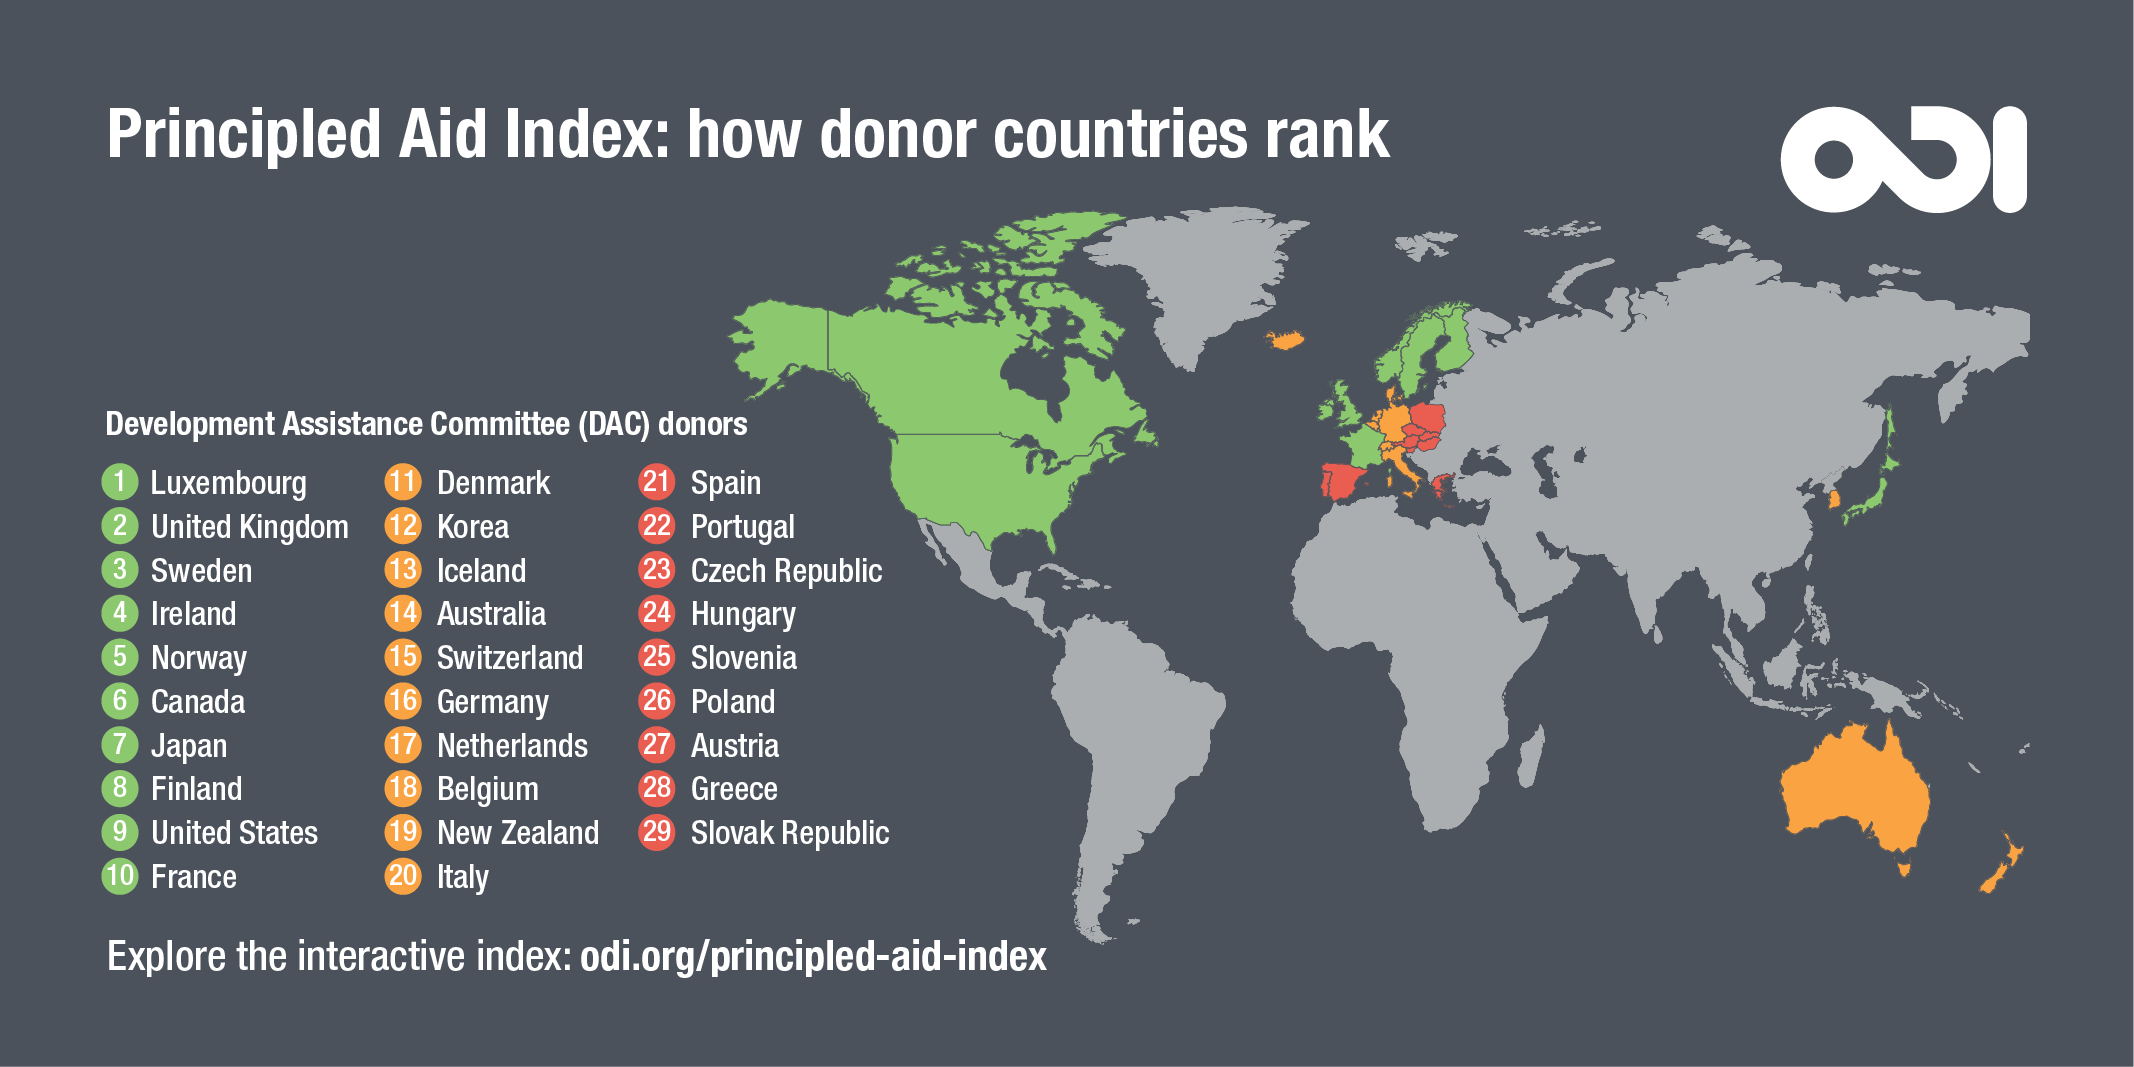 How well do 29 DAC donor countries rank on the Principled Aid Index?